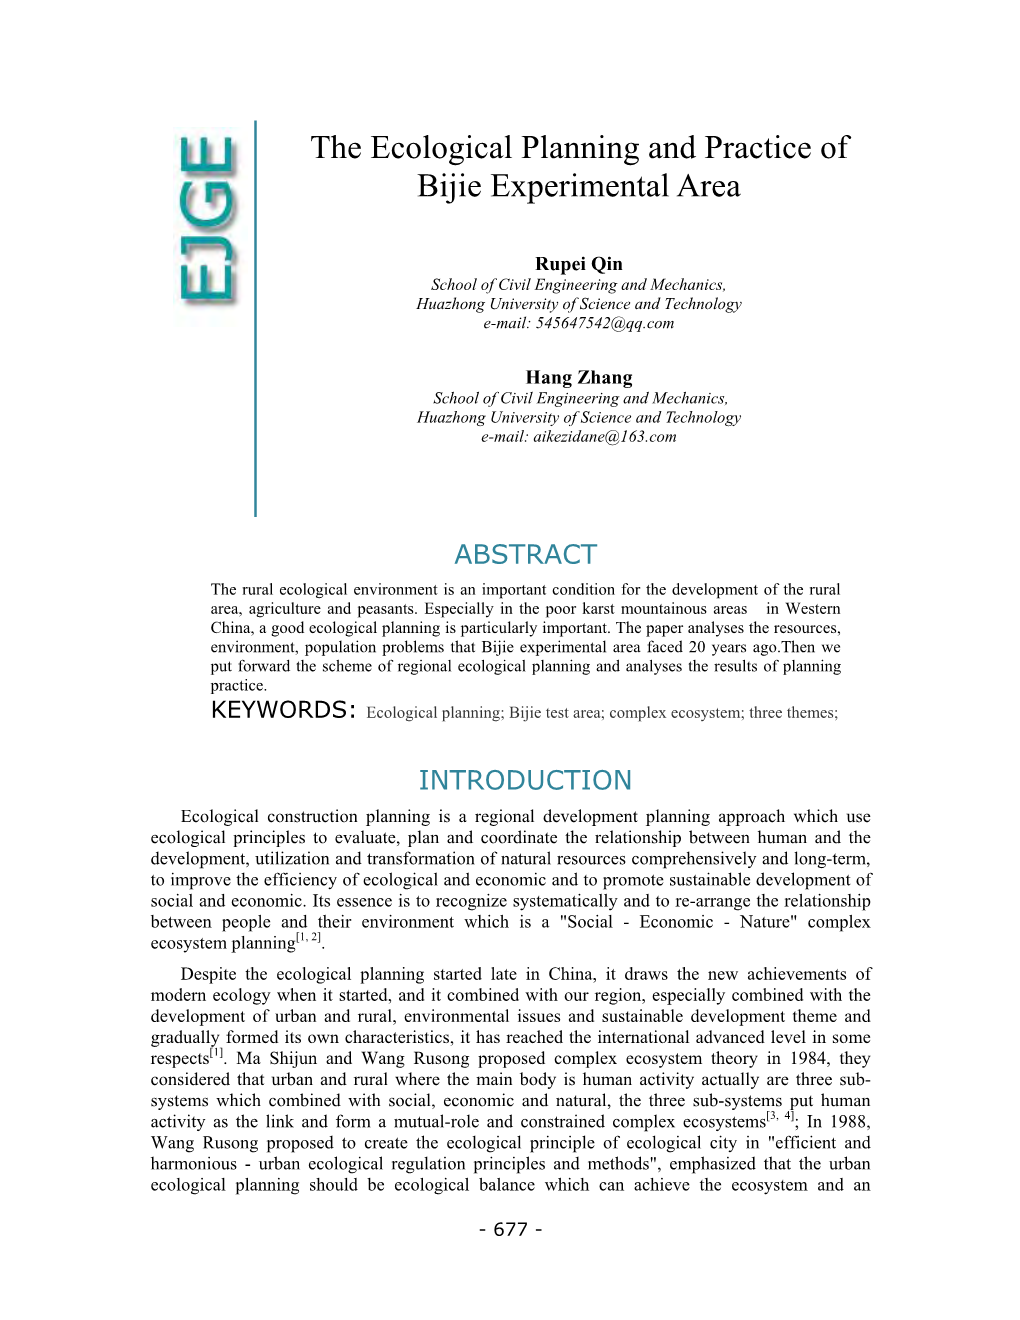 The Ecological Planning and Practice of Bijie Experimental Area